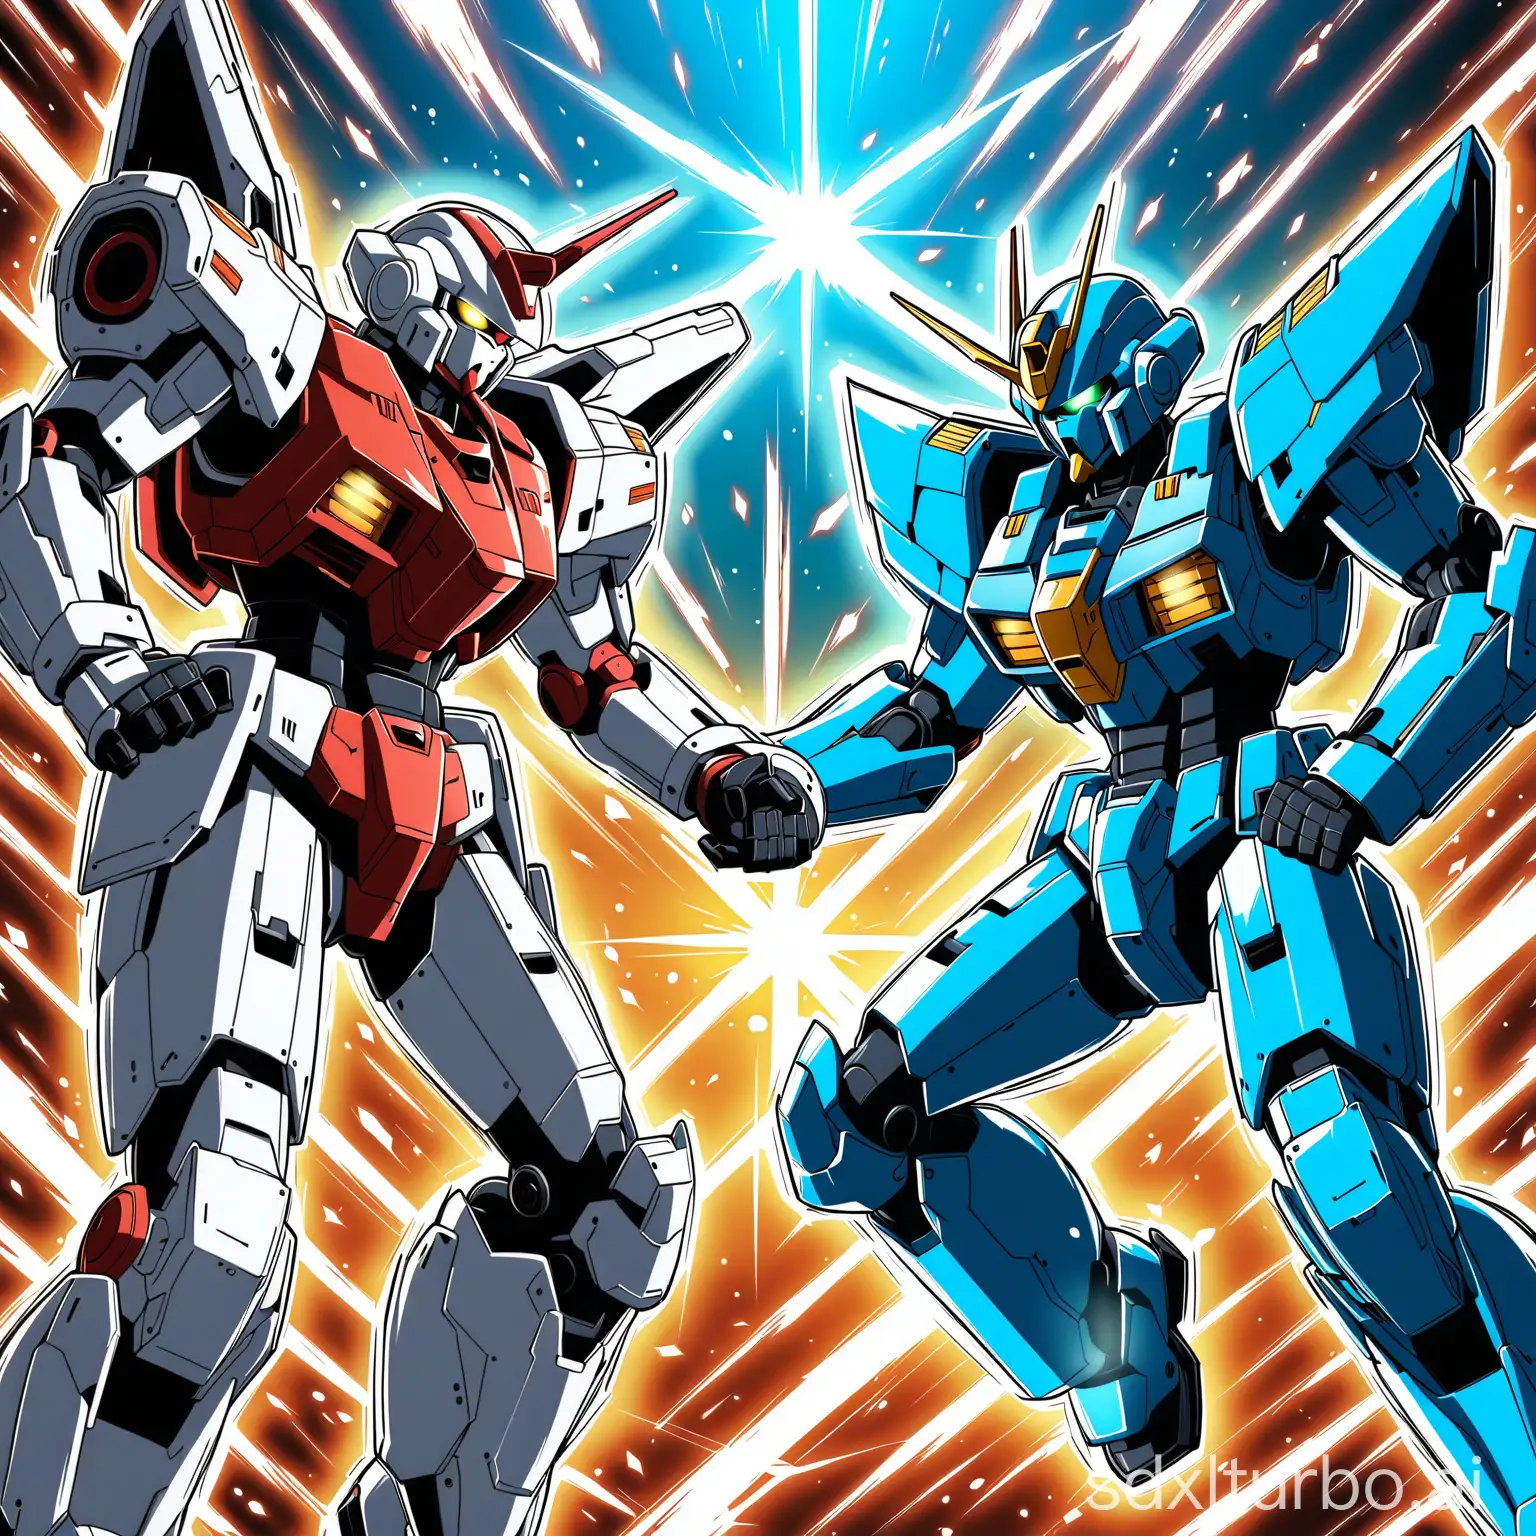 Energetic-Youth-Battling-in-Mech-Suits-Dynamic-Anime-Scene